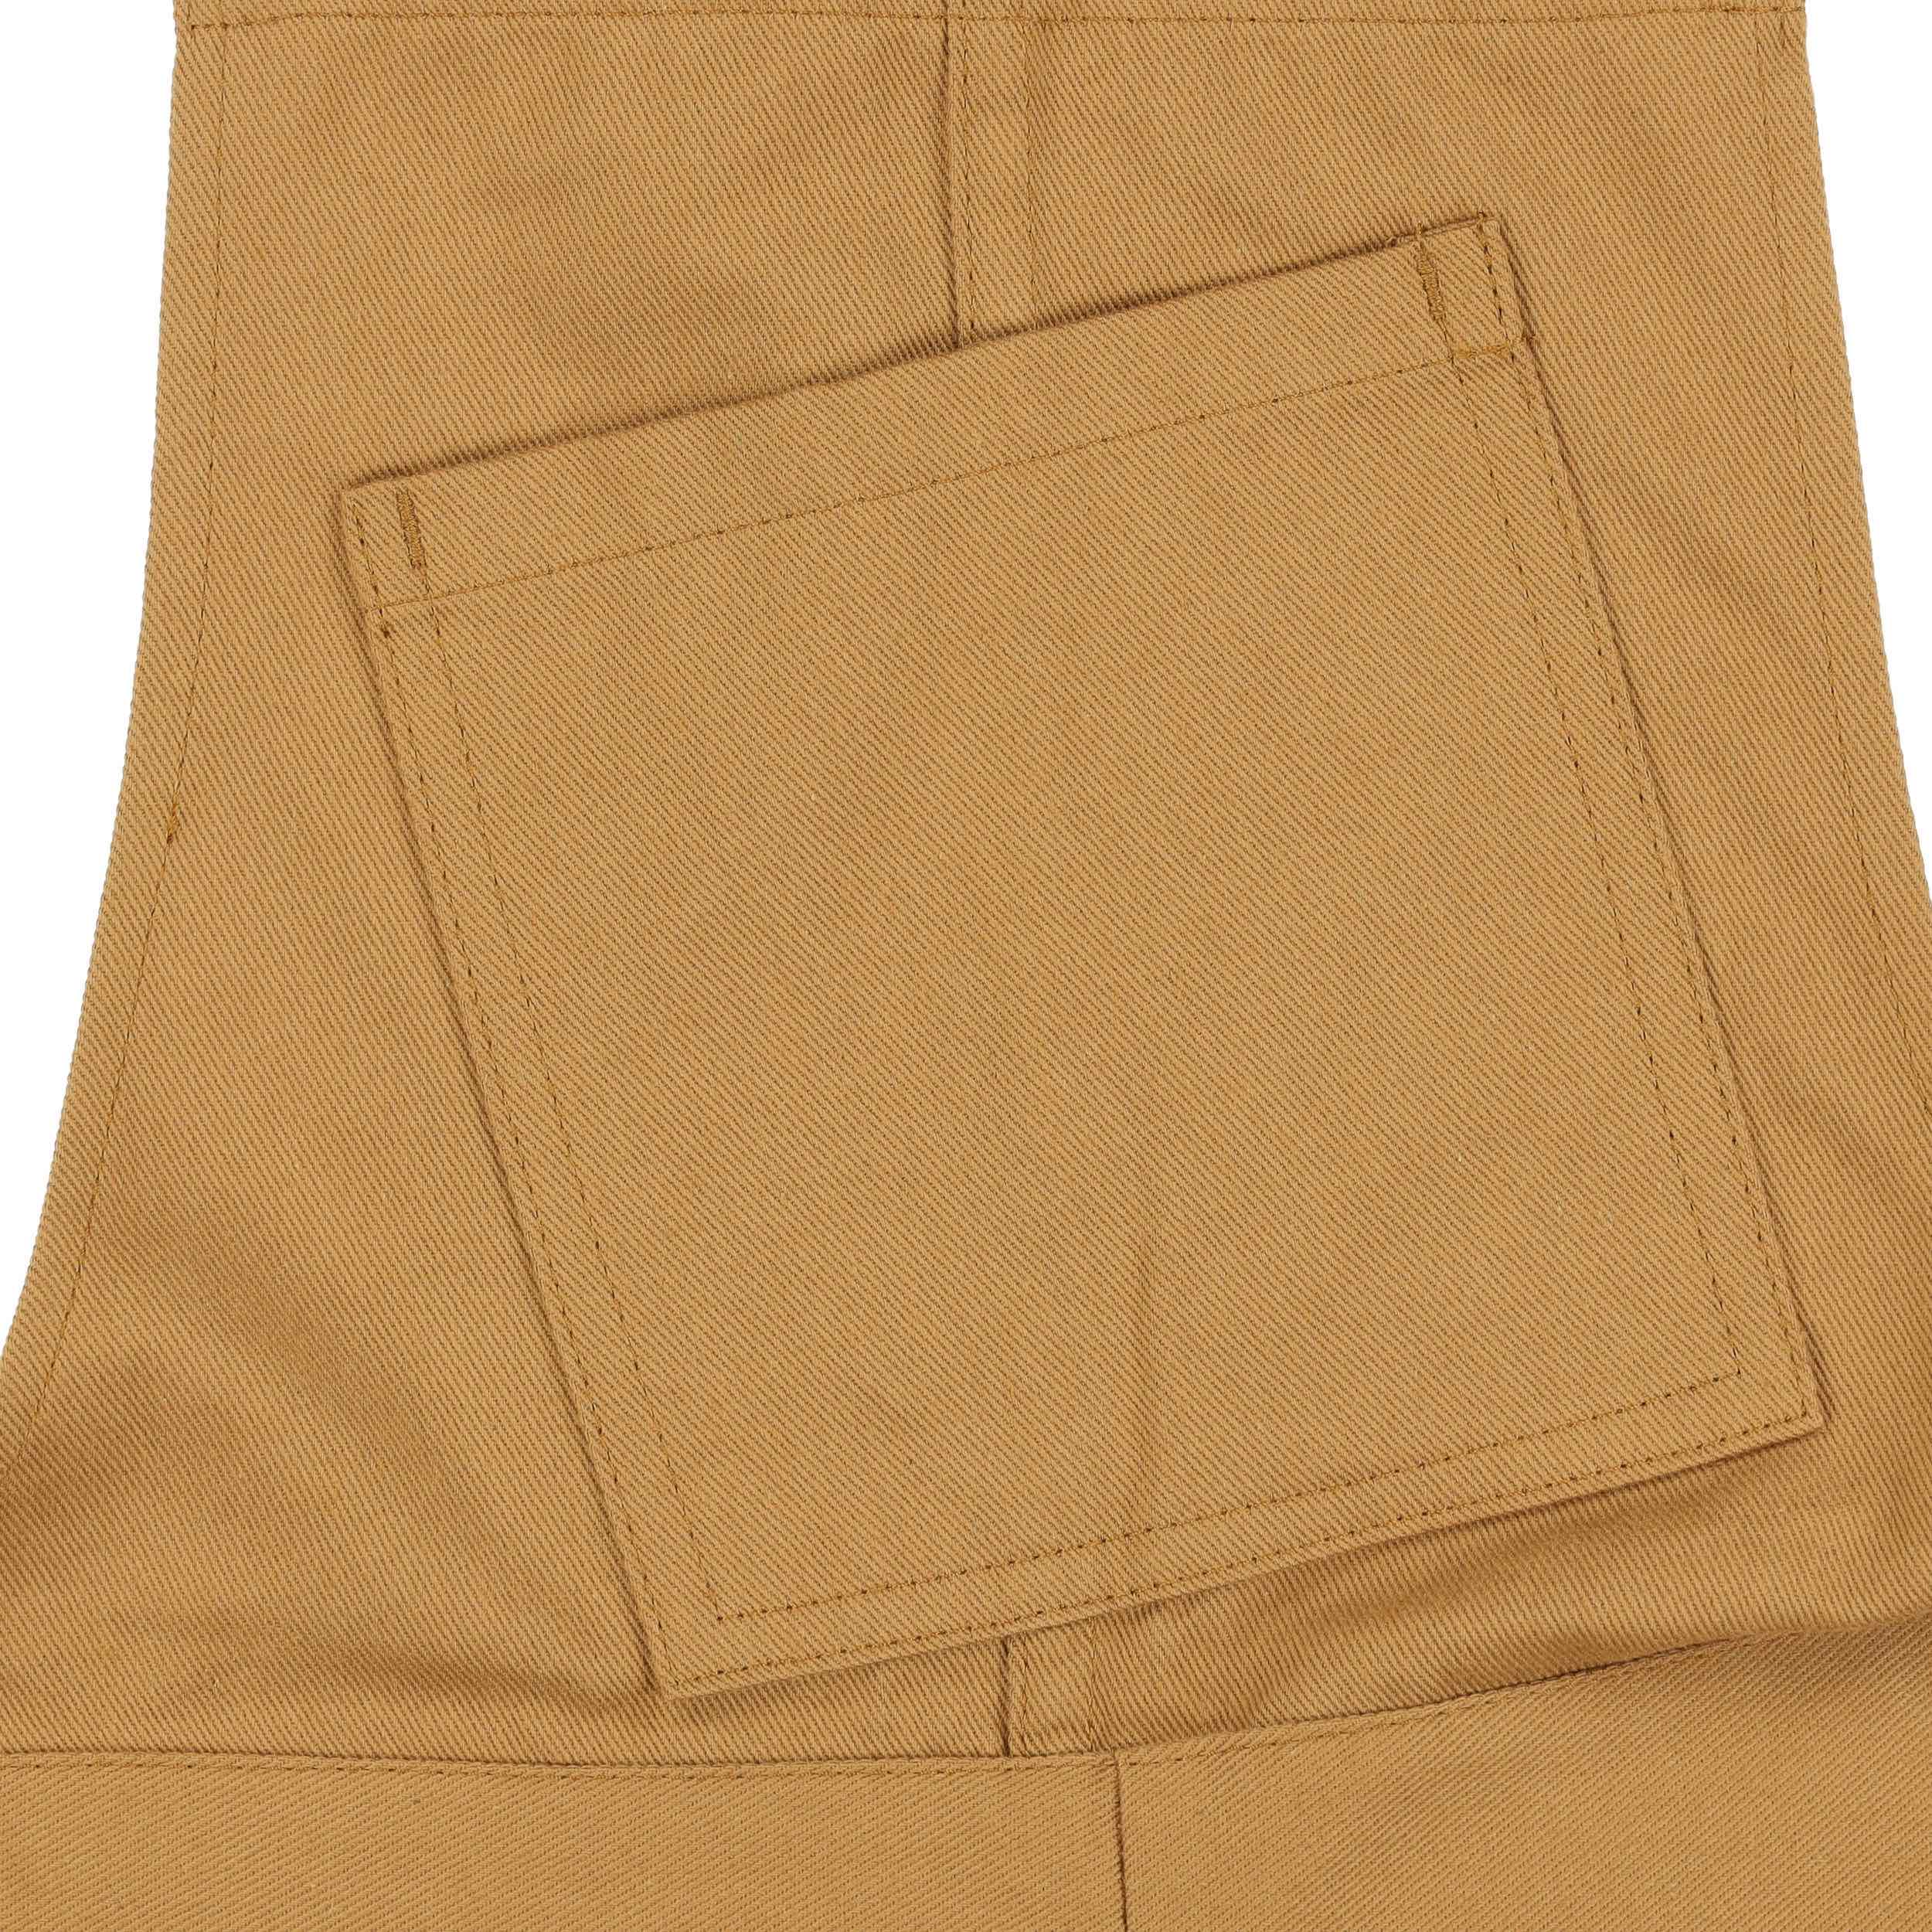 Carrier Company Women's Dungarees in Tan